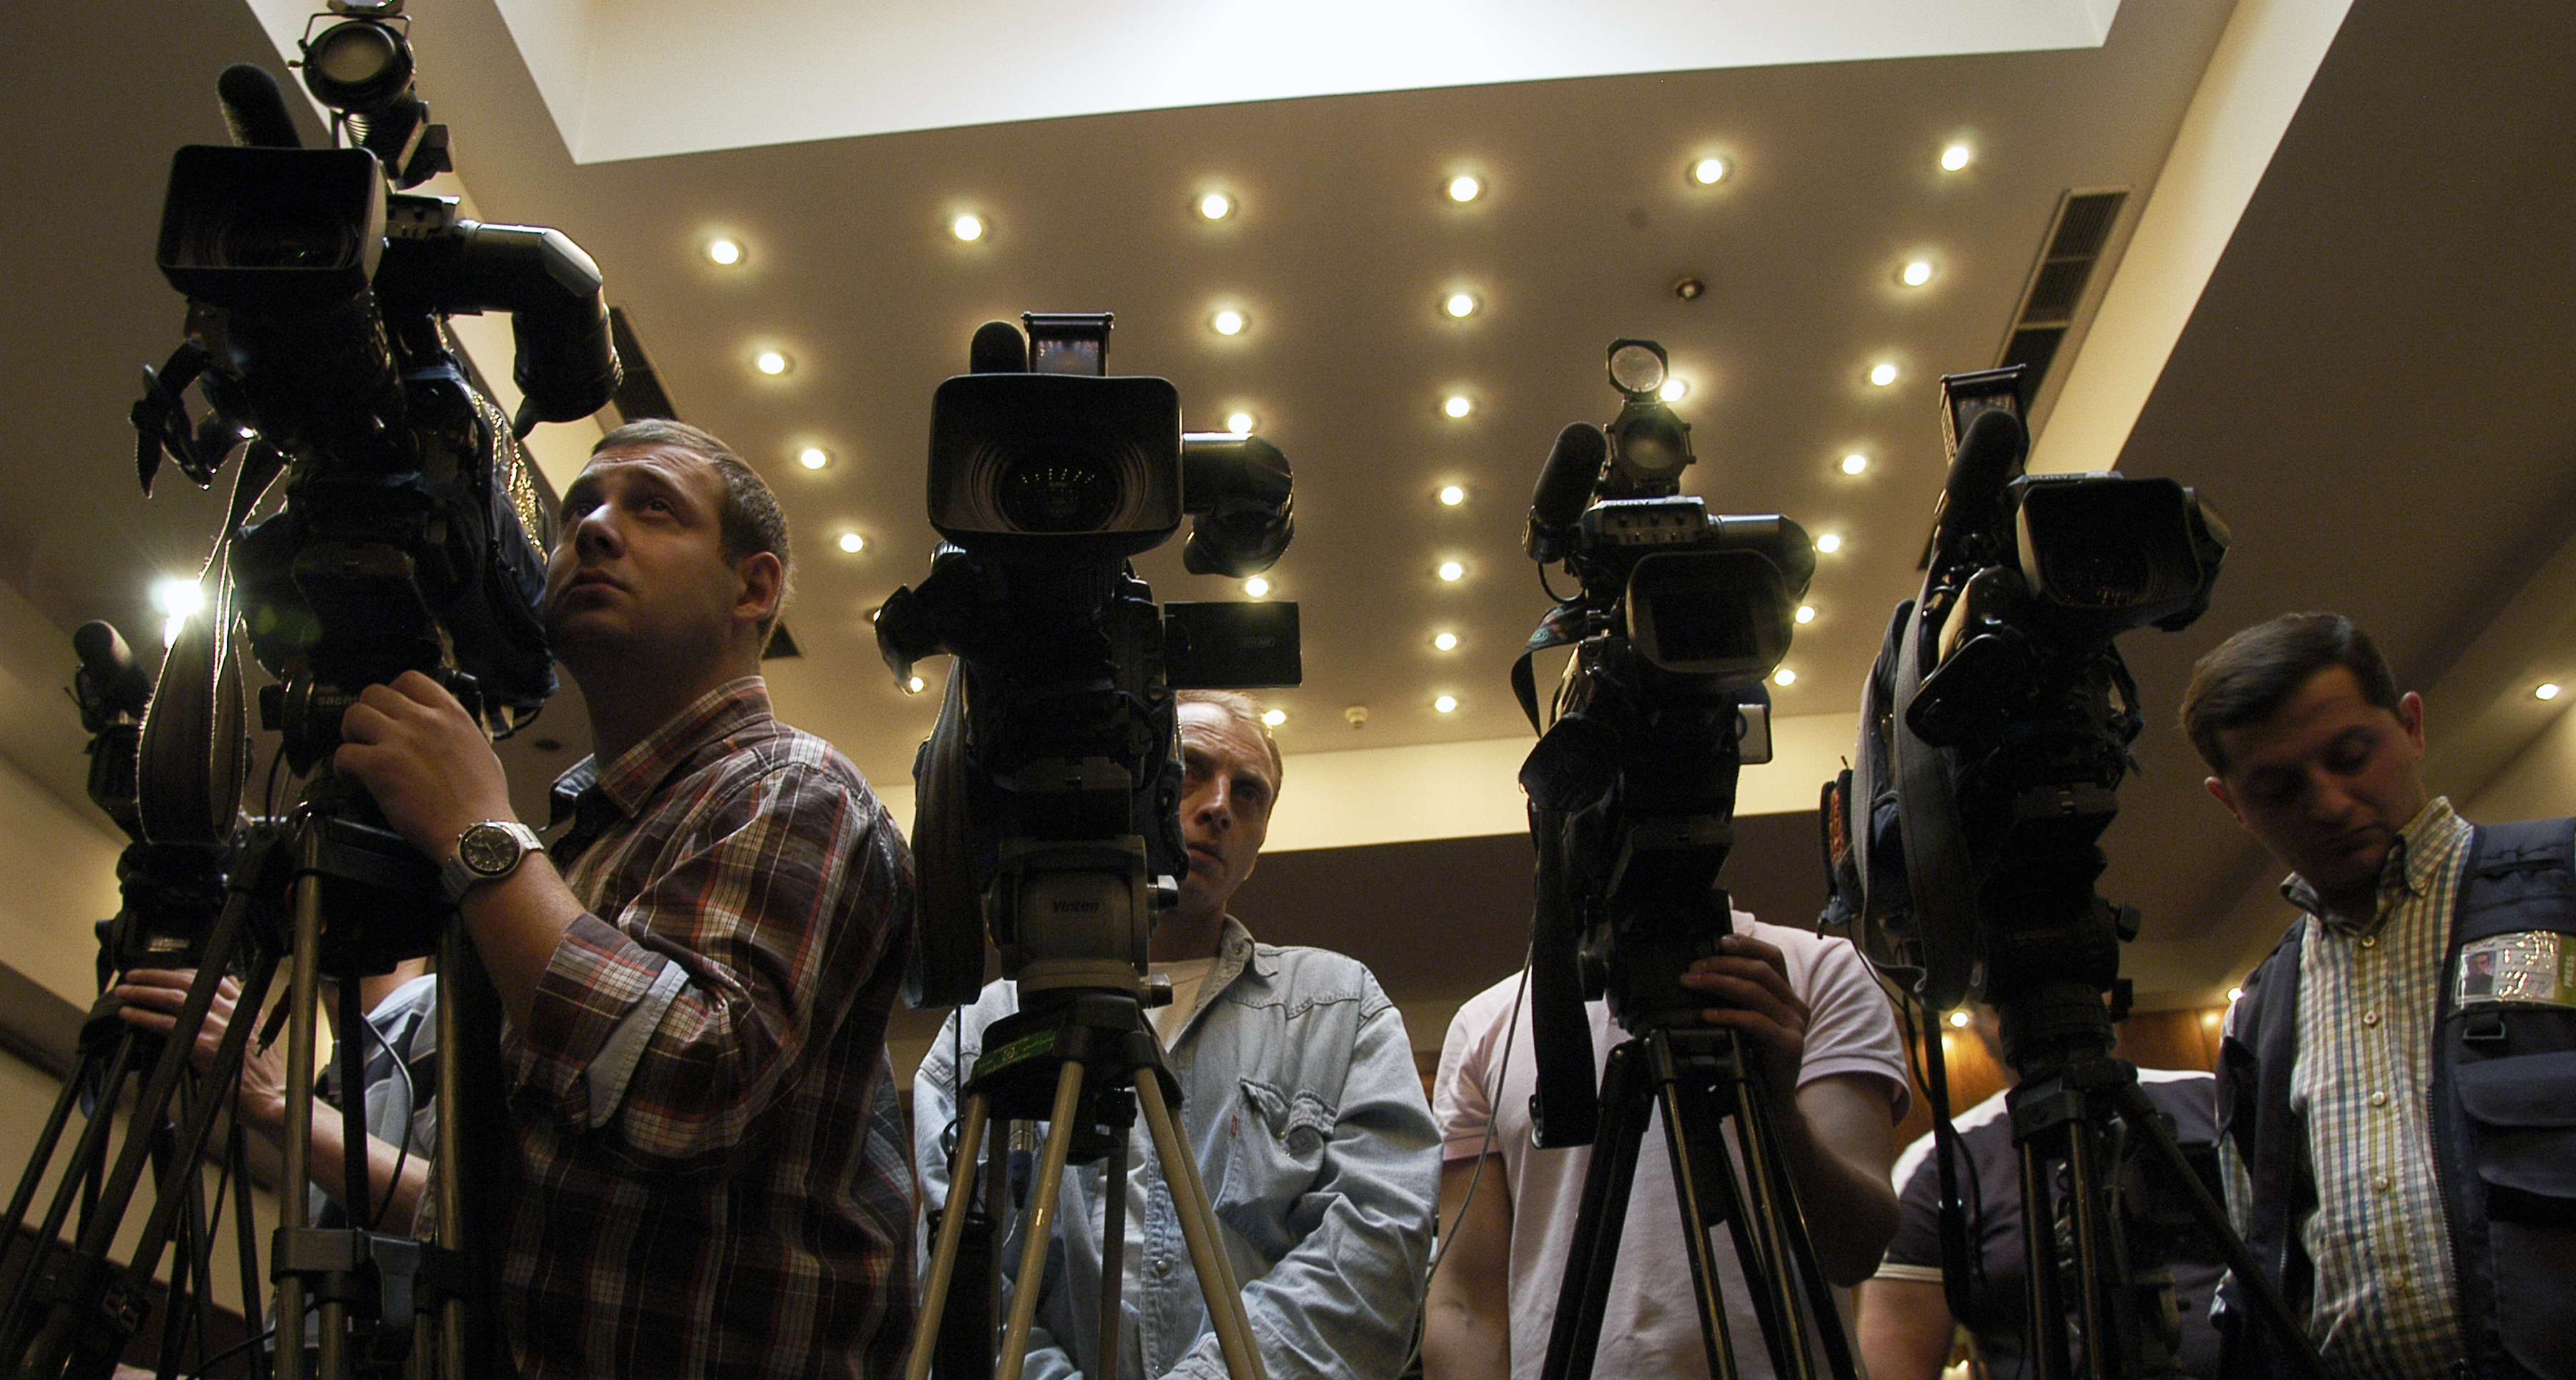 Camera_crews_at_the_joint_Press_Conference_given_by_the_Congress_and_the_ODIHR._Tbilisi_2010.jpg